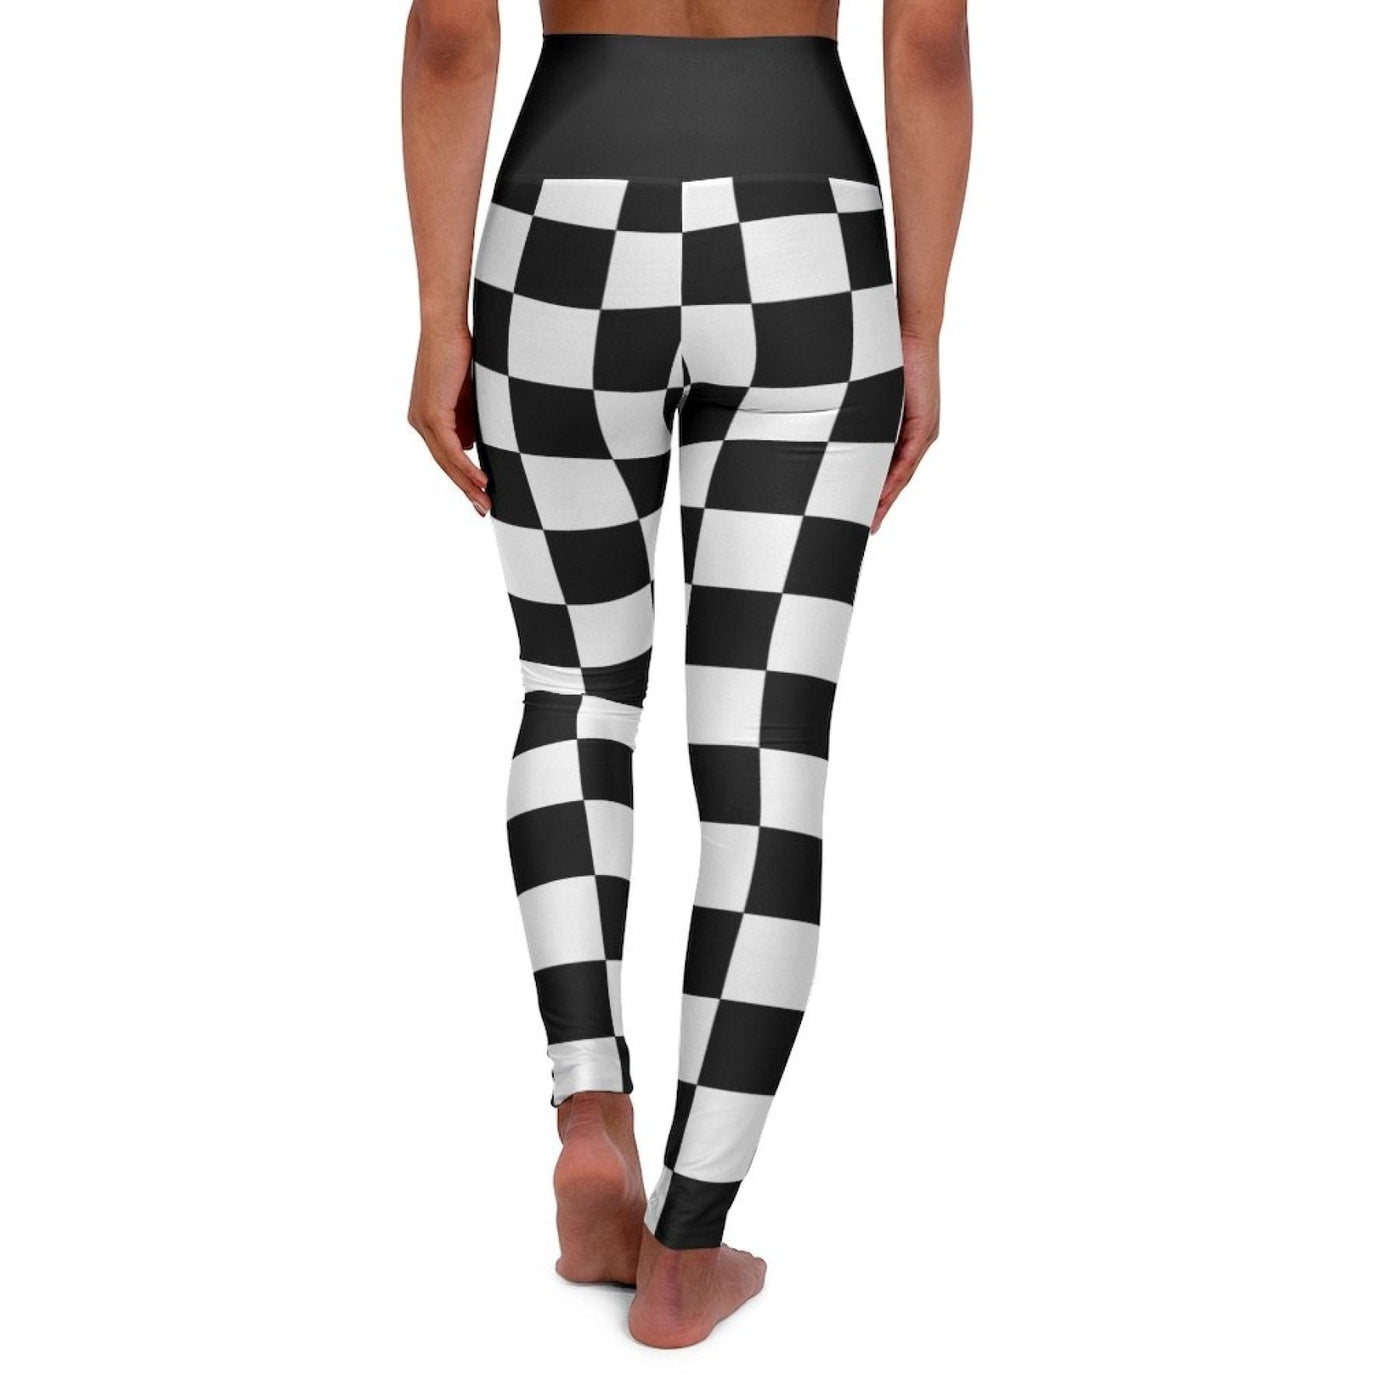 High Waisted Yoga Leggings Black And White Checker Style Fitness Pants - Womens